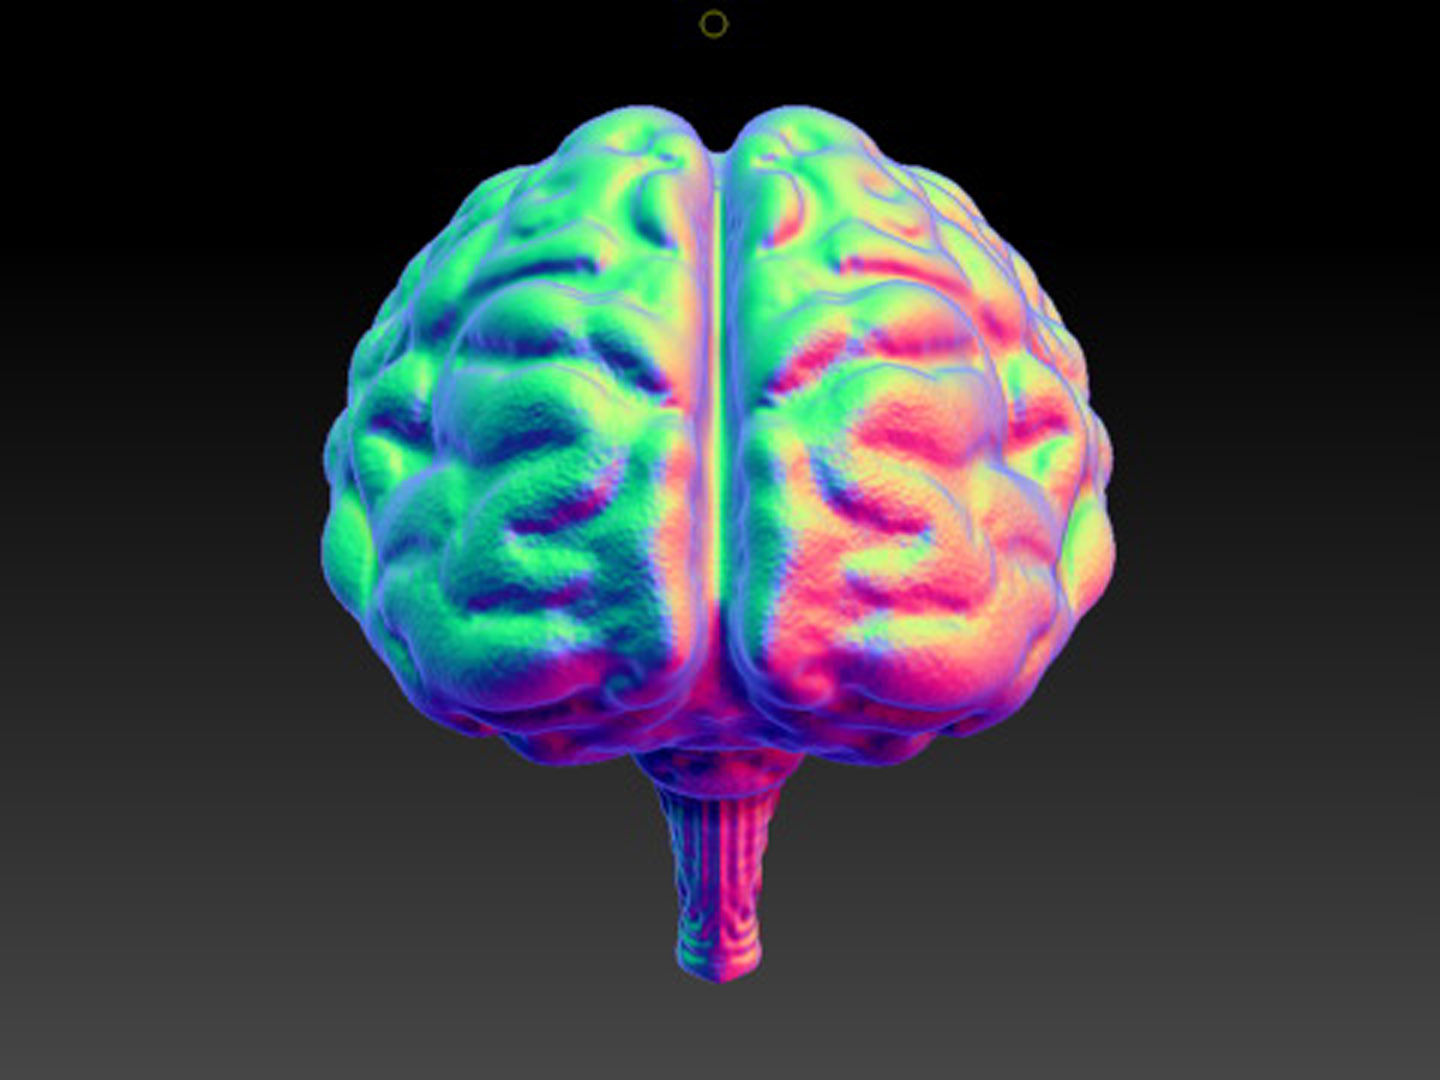 how good is brainmeasures for zbrush certification